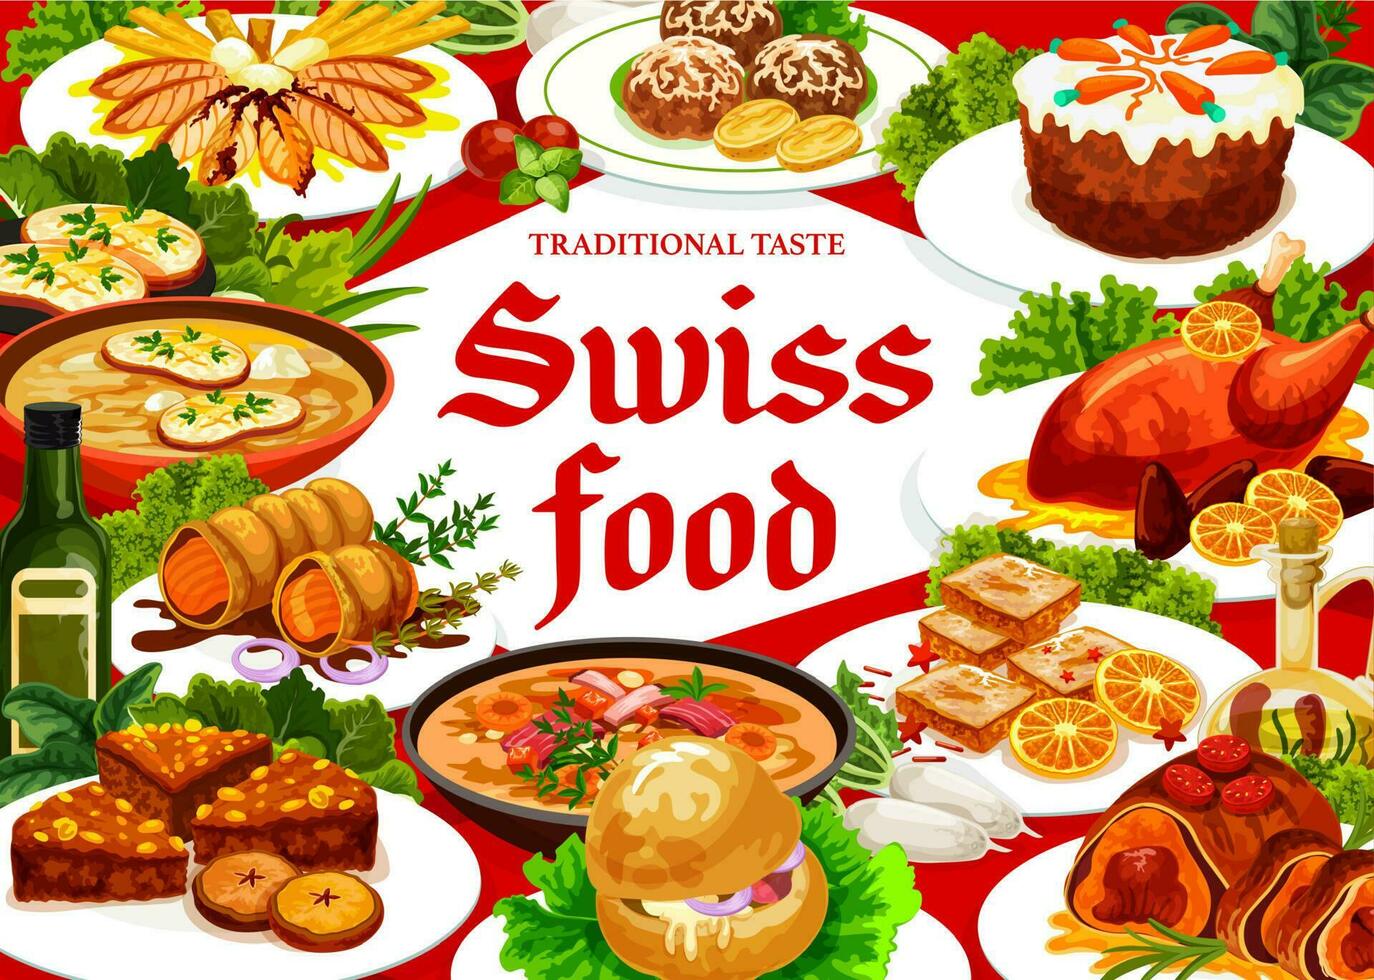 Swiss cuisine restaurant menu with dishes vector